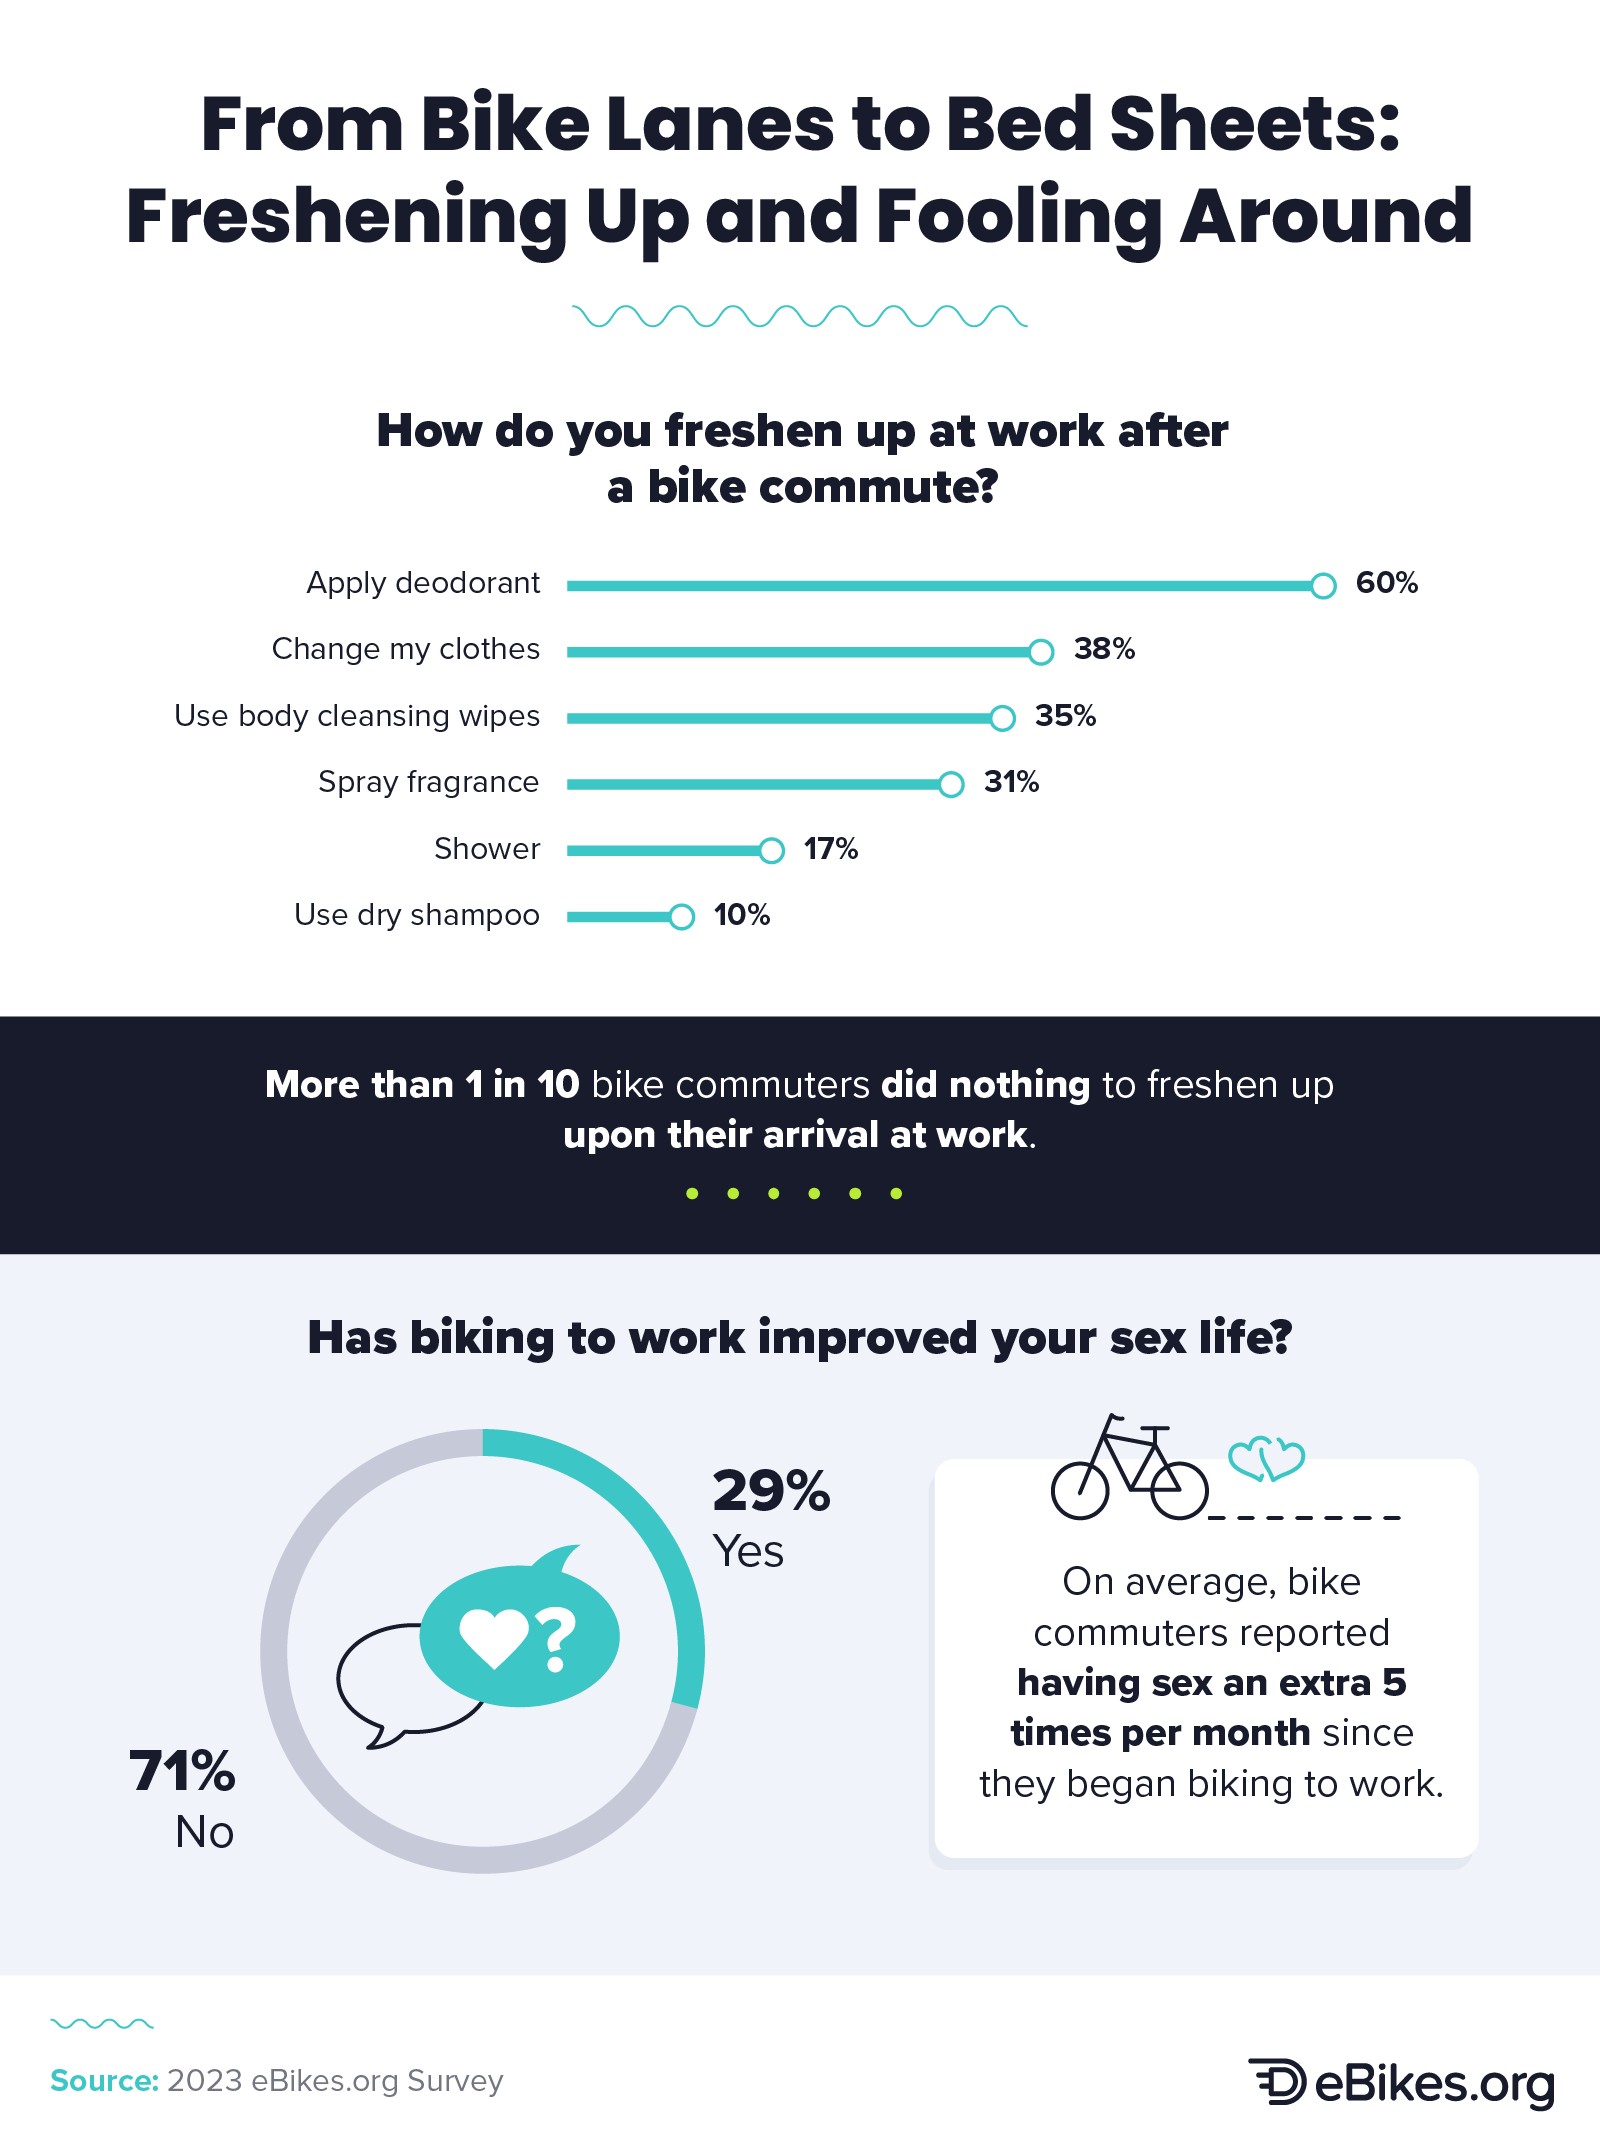 Uncover post-commute refreshment for bikers and its impact on personal lives in this infographic.